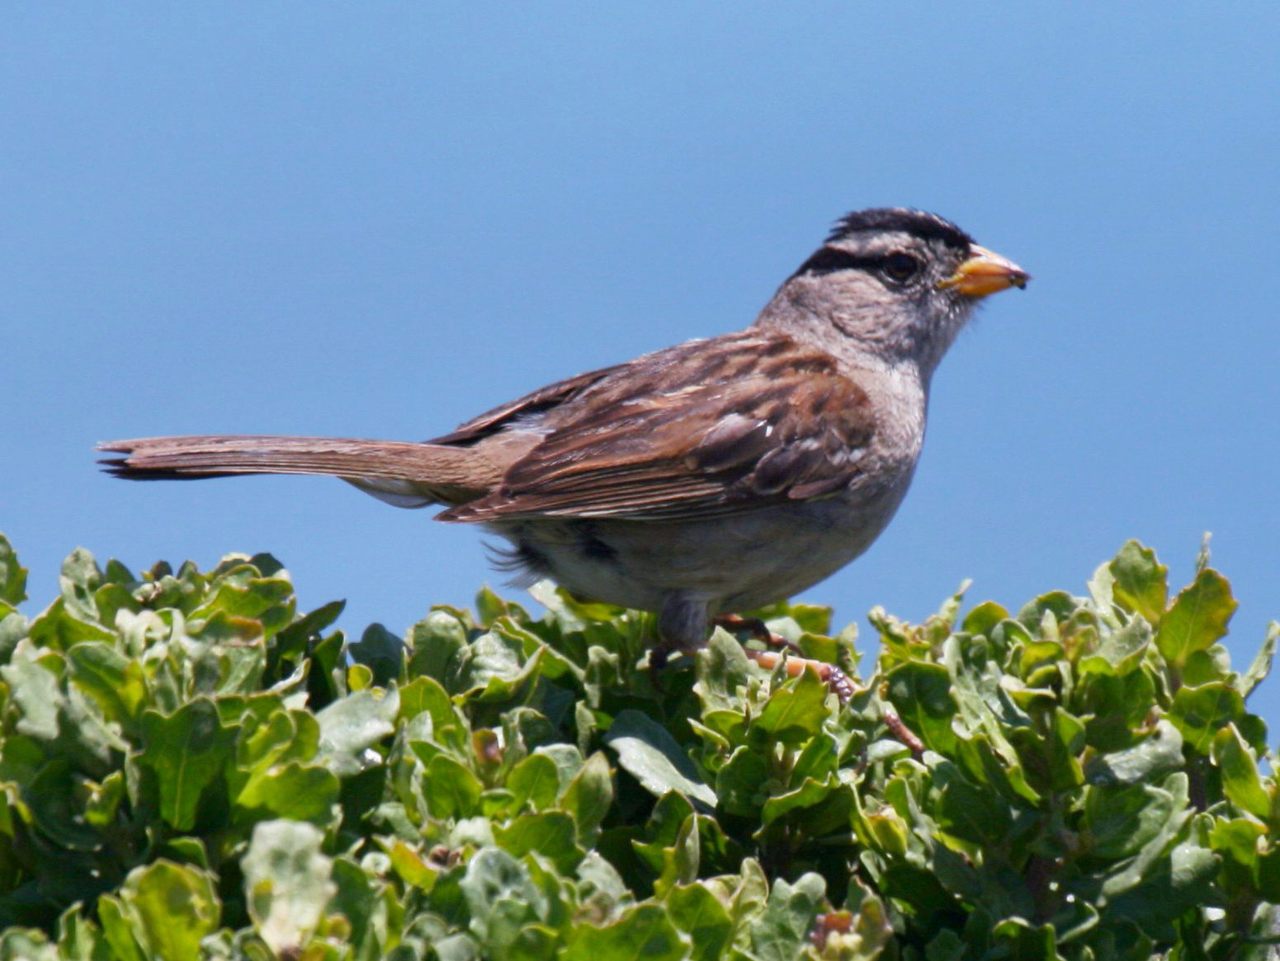 Male white-crowned sparrows (Zonotrichia leucophrys) sing to defend breeding territory. Scientists are not yet sure how pandemic-induced changes to their songs will affect the birds.